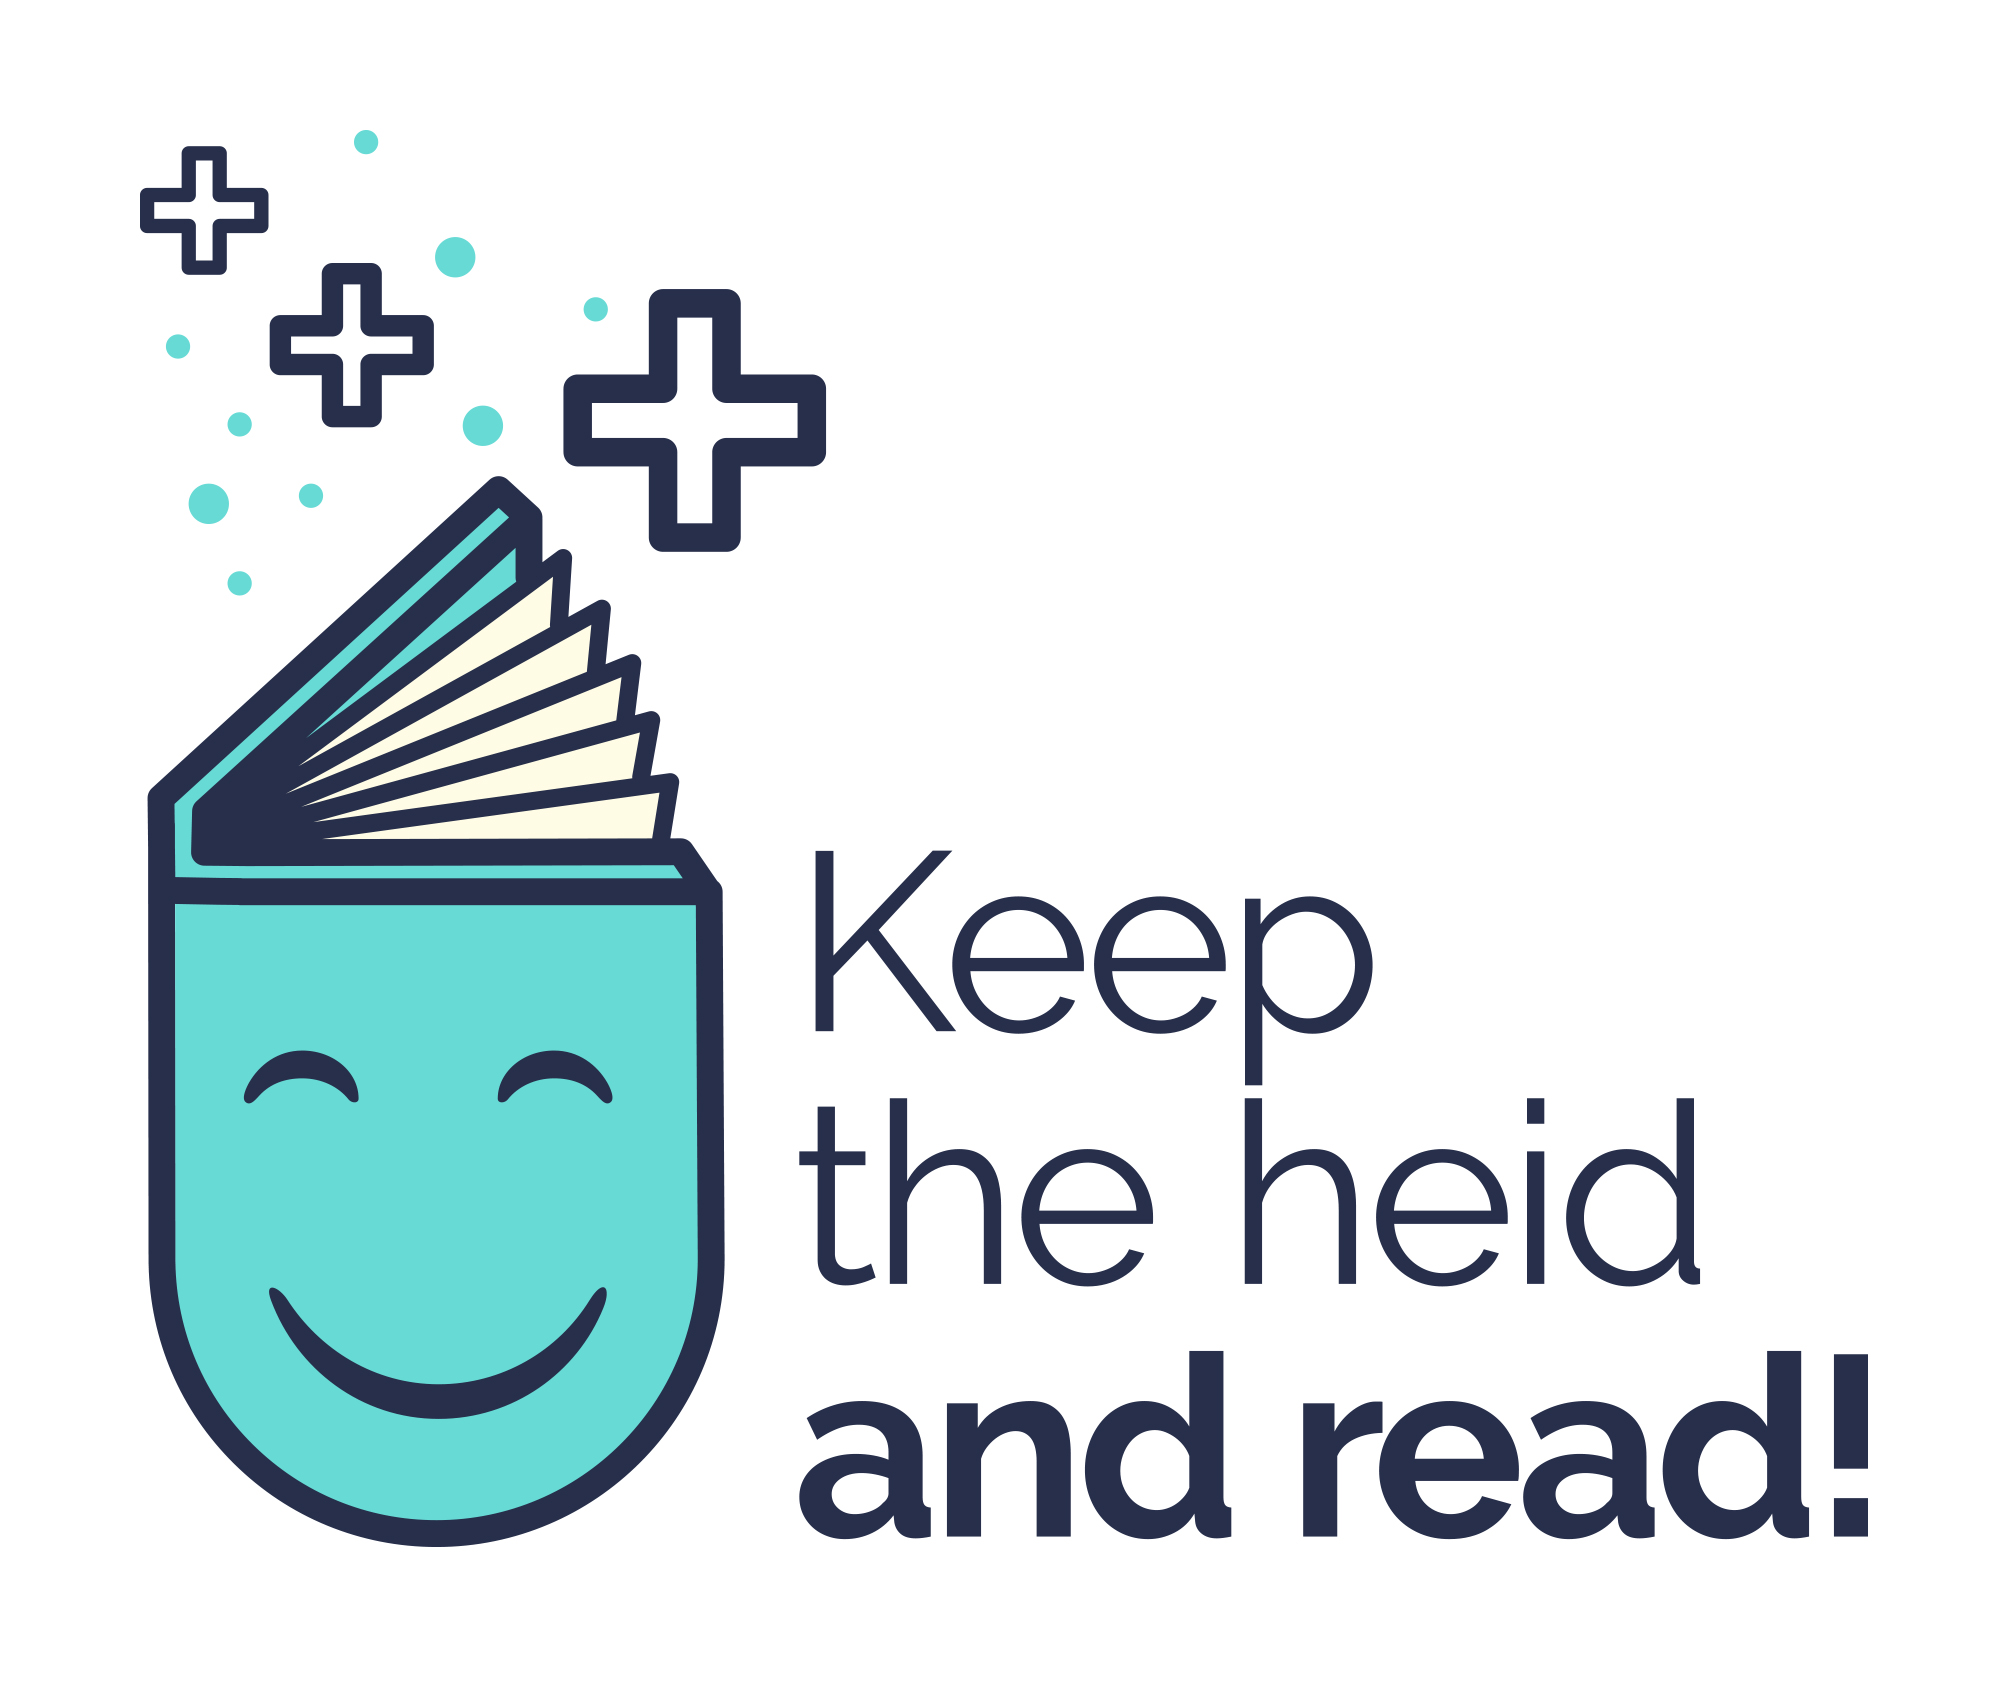 The Keep the heid and read! logo, showing a book with a smiling face